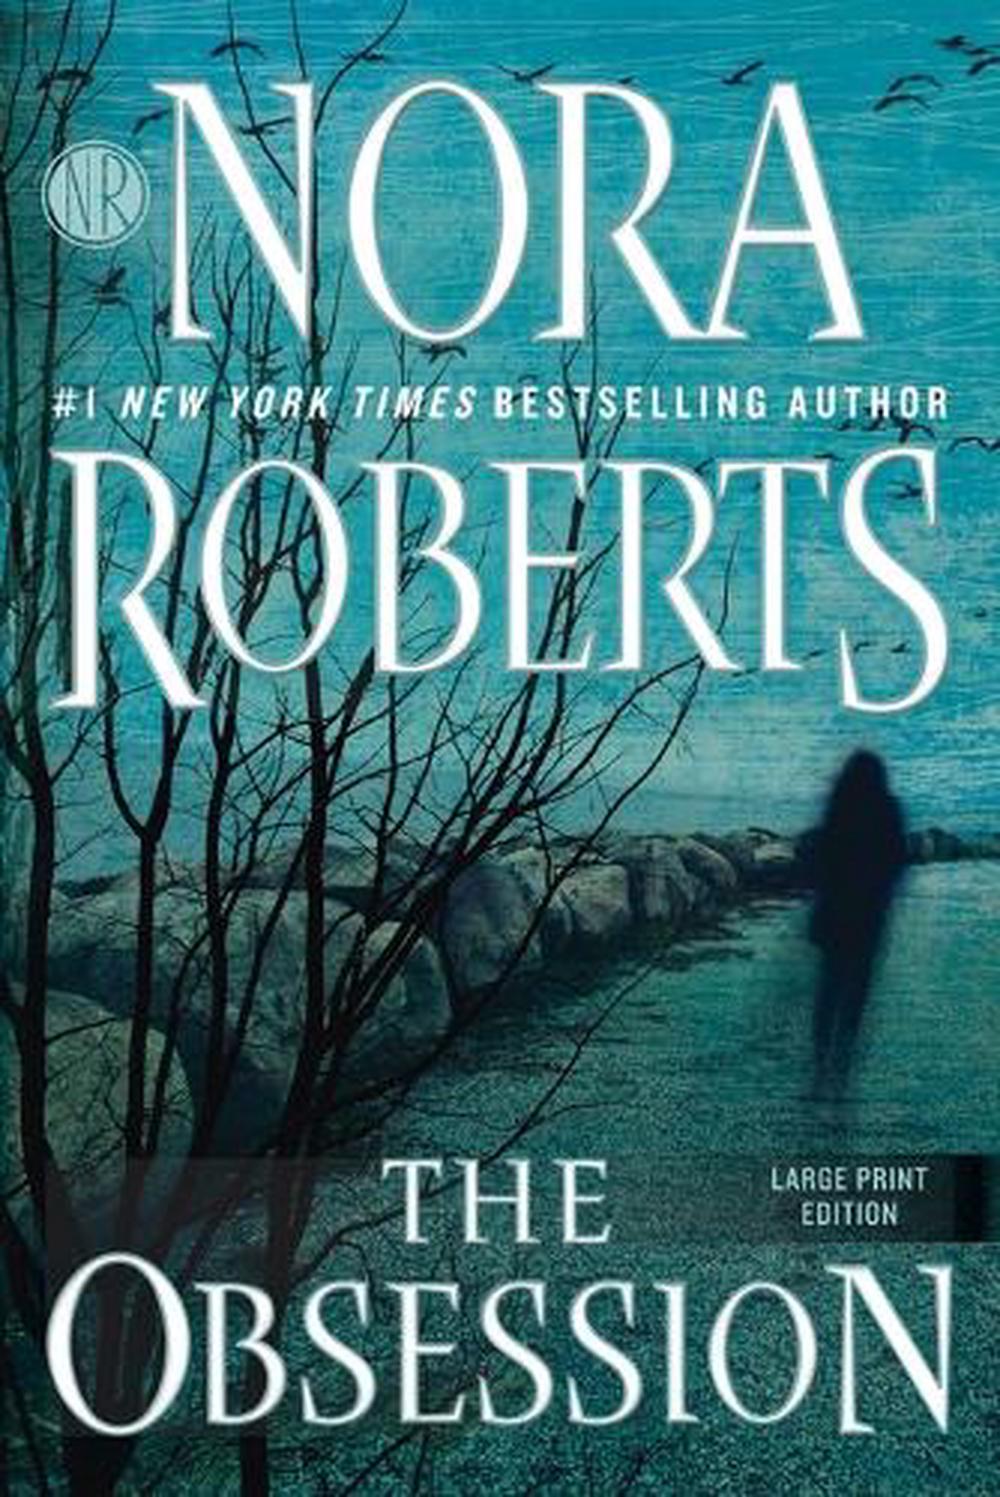 the obsession by nora roberts